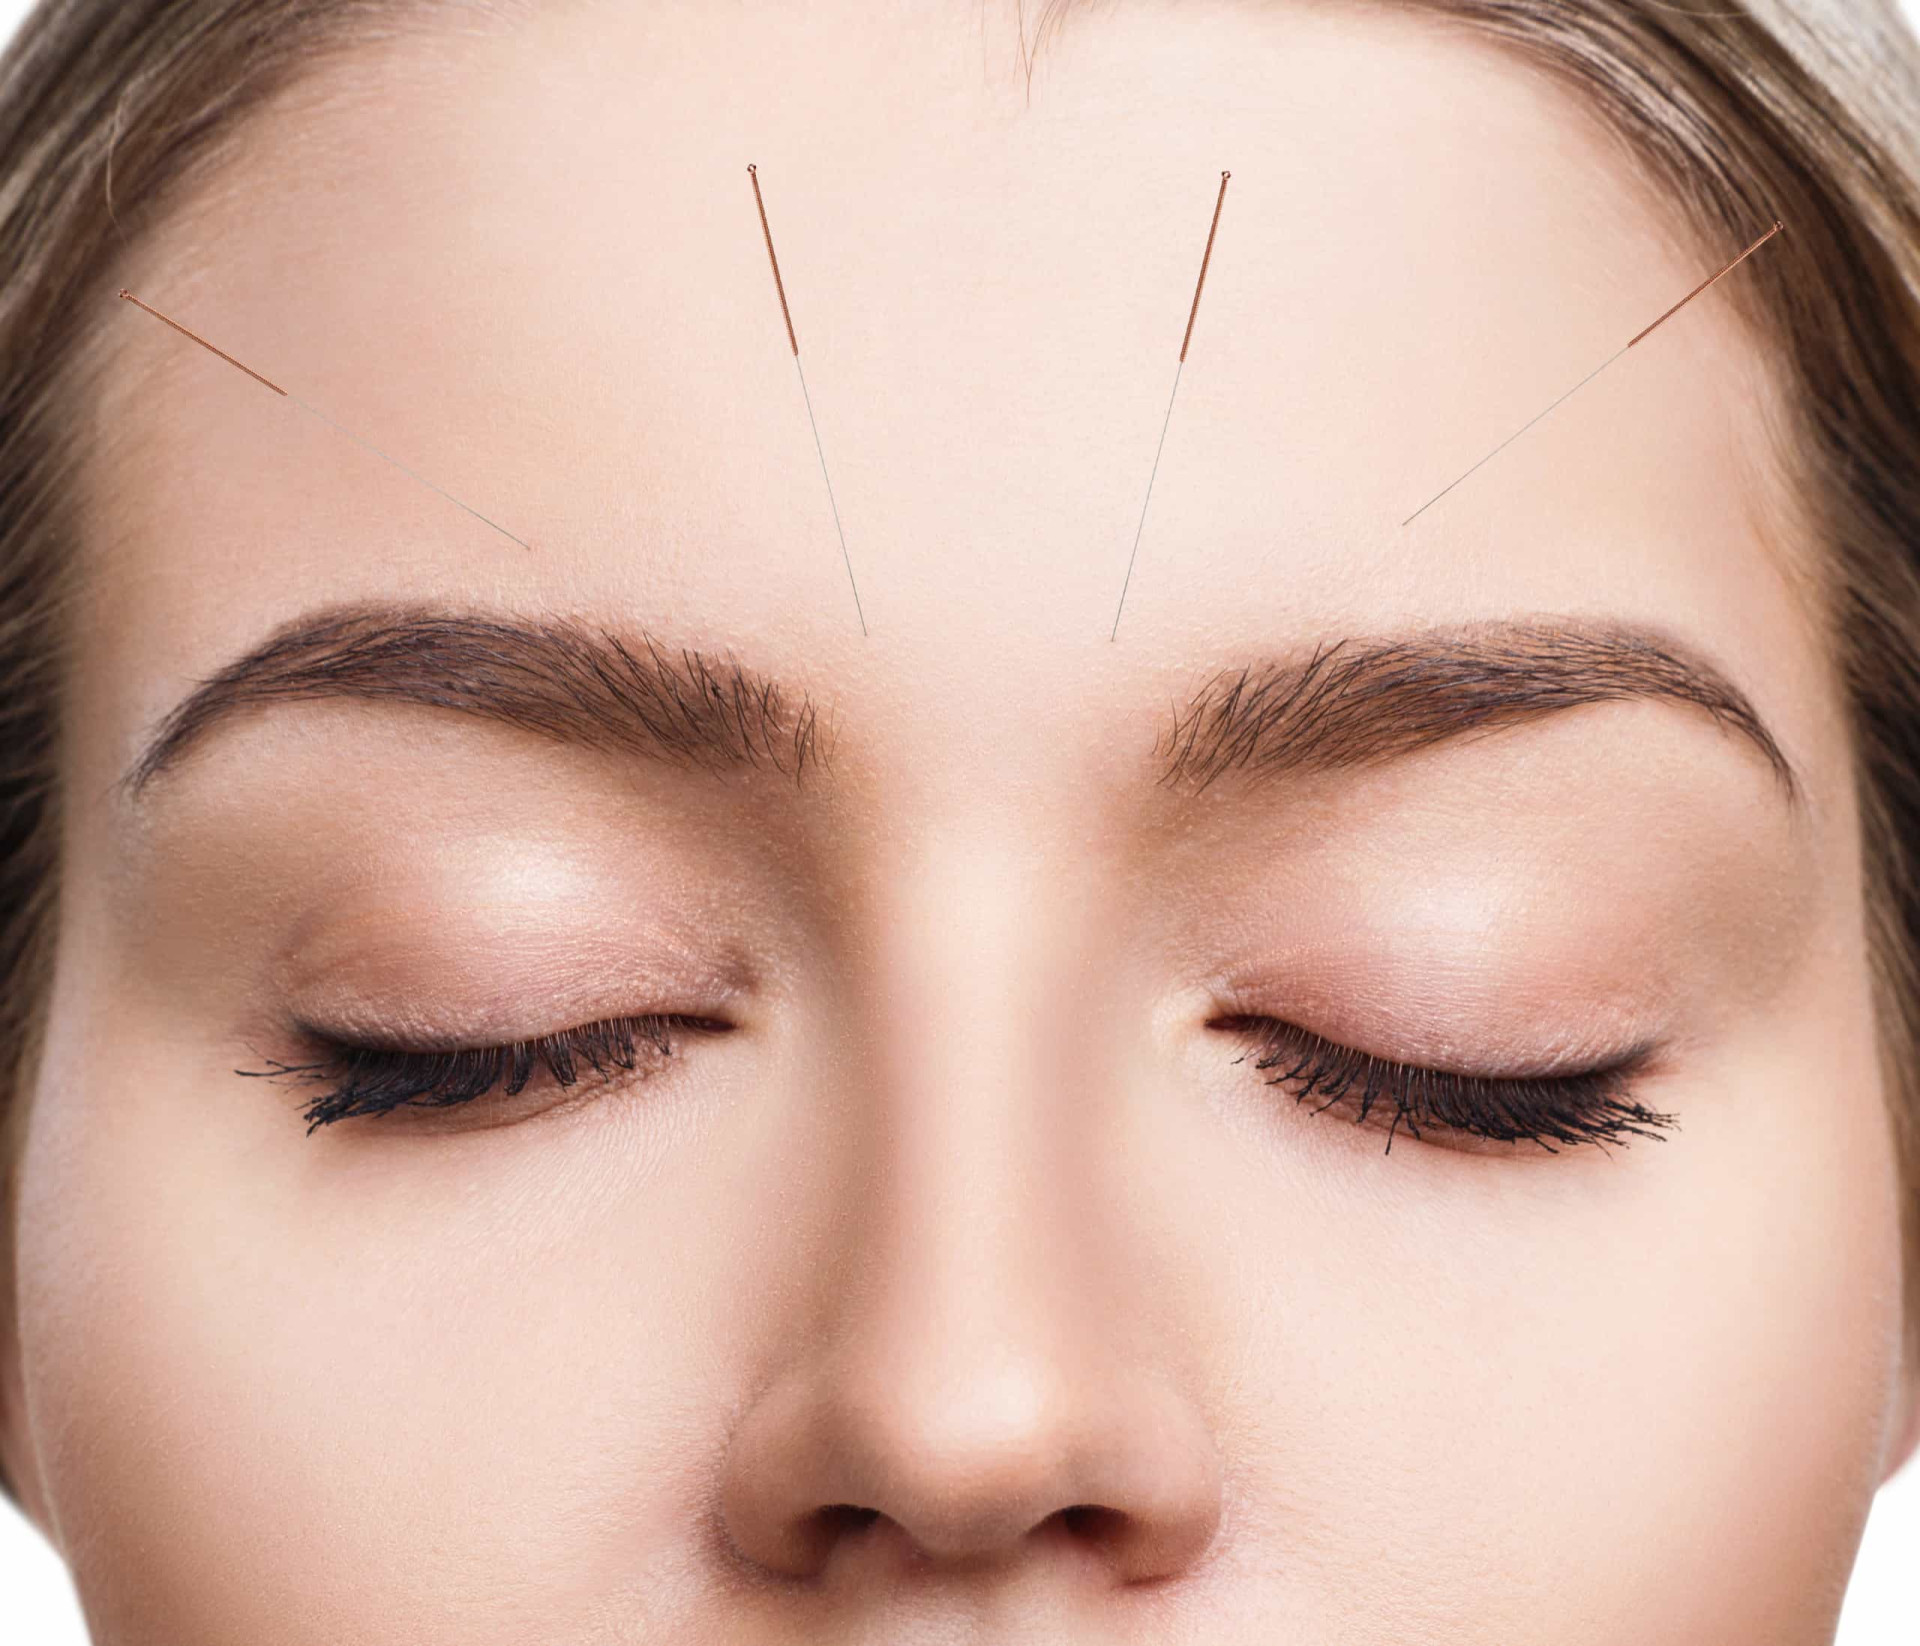 <p>You may think that you have to lay flat for hours during a session. However, the average acupuncture session typically takes just 15 to 20 minutes. The benefits can often be felt immediately.</p><p><a href="https://www.msn.com/en-us/community/channel/vid-7xx8mnucu55yw63we9va2gwr7uihbxwc68fxqp25x6tg4ftibpra?cvid=94631541bc0f4f89bfd59158d696ad7e">Follow us and access great exclusive content every day</a></p>